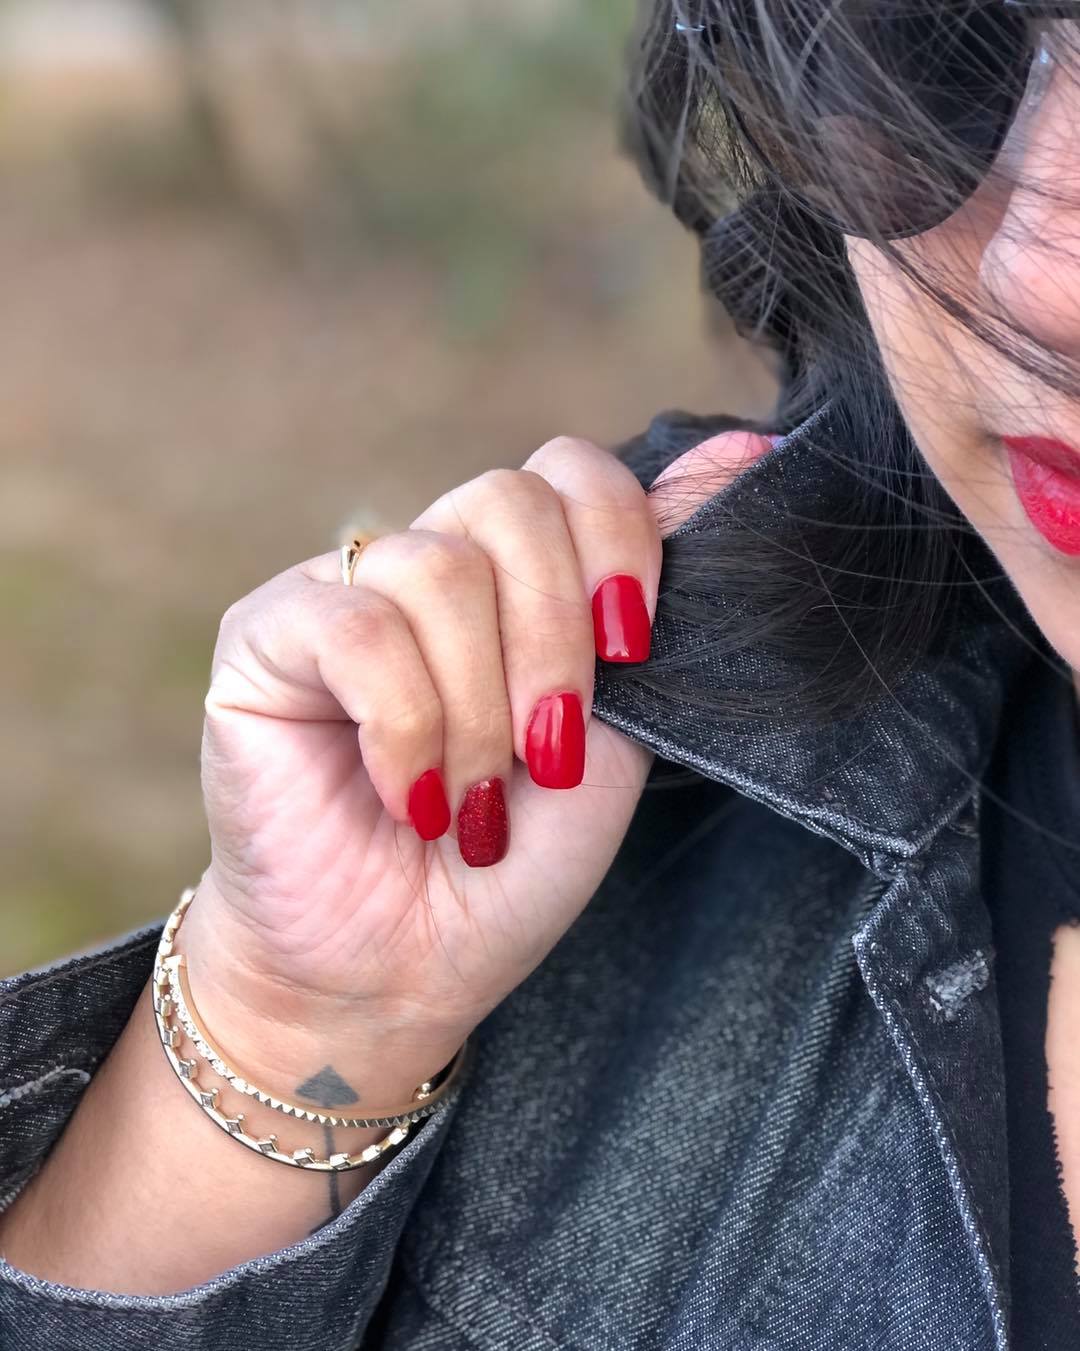 Red lips 💋, red nails ❤️, rock that confidence!